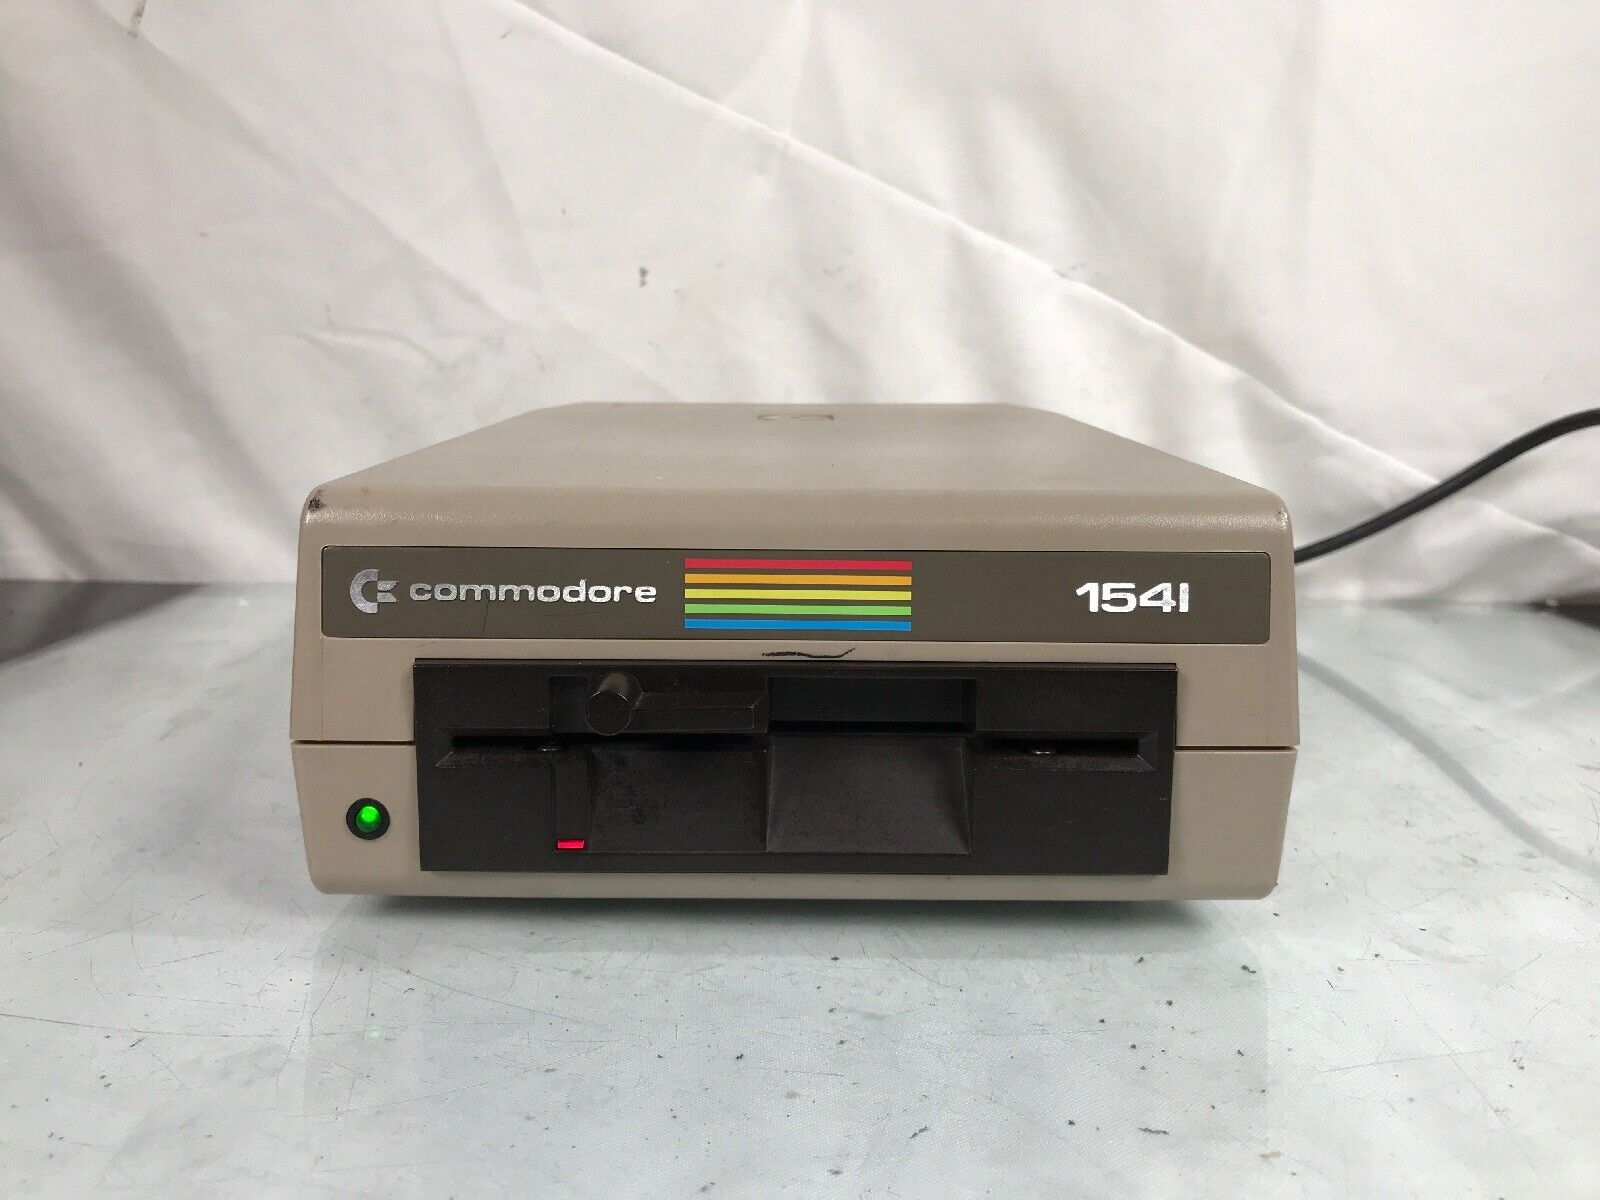 Vintage 1980's Commodore 1541 PC Single Drive Floppy Disk Personal Computer